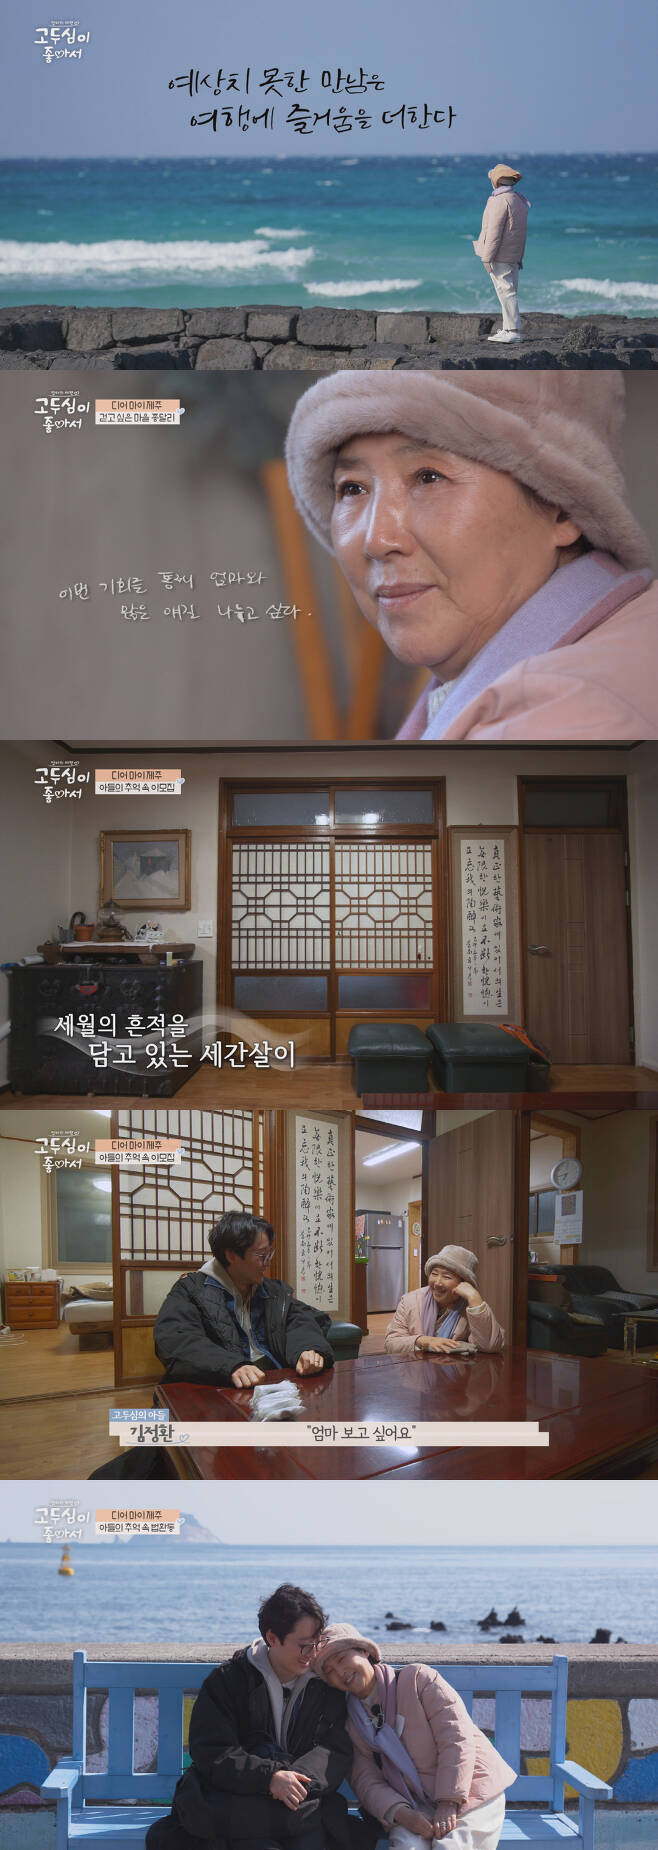 LG Hello Vision - Channel A co-production I like my mothers Travel Go Do-shim (hereinafter I like Go Do-shim), which was first broadcast on the 13th, depicted Go Do-shim enjoying Travel in the first Travel paper Jeju.On this day, Go Doo-shim said, I am so excited about how long I am leaving Travel alone, I think of my mother when I see the sea.He shows his mother at the beach of Sehwa and his son, Actor Kim Jung-hwan, enjoying the show in Sehwa Oil, showing the appearance of Mom Go Doo-shim rather than Actor Go Doo-shim.The frankness that has not been seen on the air so far has led to a hot sympathy.In addition, the travel course prepared by son Kim Jung-hwan as a companion of Jeju Island Travel for mother Go Doo-shim is attracting much attention.Jongdari, one of the three villages I want to walk in Jeju Island along with Songdangri and Ojori, was a place full of beauty enough to smile at the mouth even if I strolled leisurely.Two people who enjoyed a date with Alcondalk, such as taking pictures in front of pretty murals and drawing them from supermarkets.The scene of writing each others hearts and conveying their sincerity in the cafe guest book gave the viewers a chest clunk.Go Doo-shims former Husband died last November; Son, who kept his father by the last minute, told Go Doo-shim what he had never said before.Kim Jung-hwan said, I was a bit curious about that.I still wanted to ask her if she was okay because she left her father dead and left her last picture in her head. Go Doo-shim said: Its not okay, I really liked Husband, it was the guy I really liked.I should have lived with a man I like for a lifetime, but it gets eaten and it is just so thick. After hearing Go Doo-shim, Kim Jung-hwan pulled a box from his bag that kept his fathers relics.I sort out the relics, and this is what my dad always carried, he explained.In the box, there were years of Go Doo-shim from the old days to the recent appearance.Its all my face, its all my pictures, why did I carry them like this, I hated them, said Go Doo-shim, who saw the artifacts.It was not a fuss but a longing and memories that Husband had left, he said in a narration.Go Doo-shim said that he was able to reduce the burden of his heart a little thanks to the sincerity of Son.Kim Jung-hwan said, I hope my mother will lean on me now. I hope my mother will tell me comfortably.Go Doo-shim was impressed by the deep heart of Son and expressed his gratitude that Son, who has grown up firmly, is now unbelievably happy.